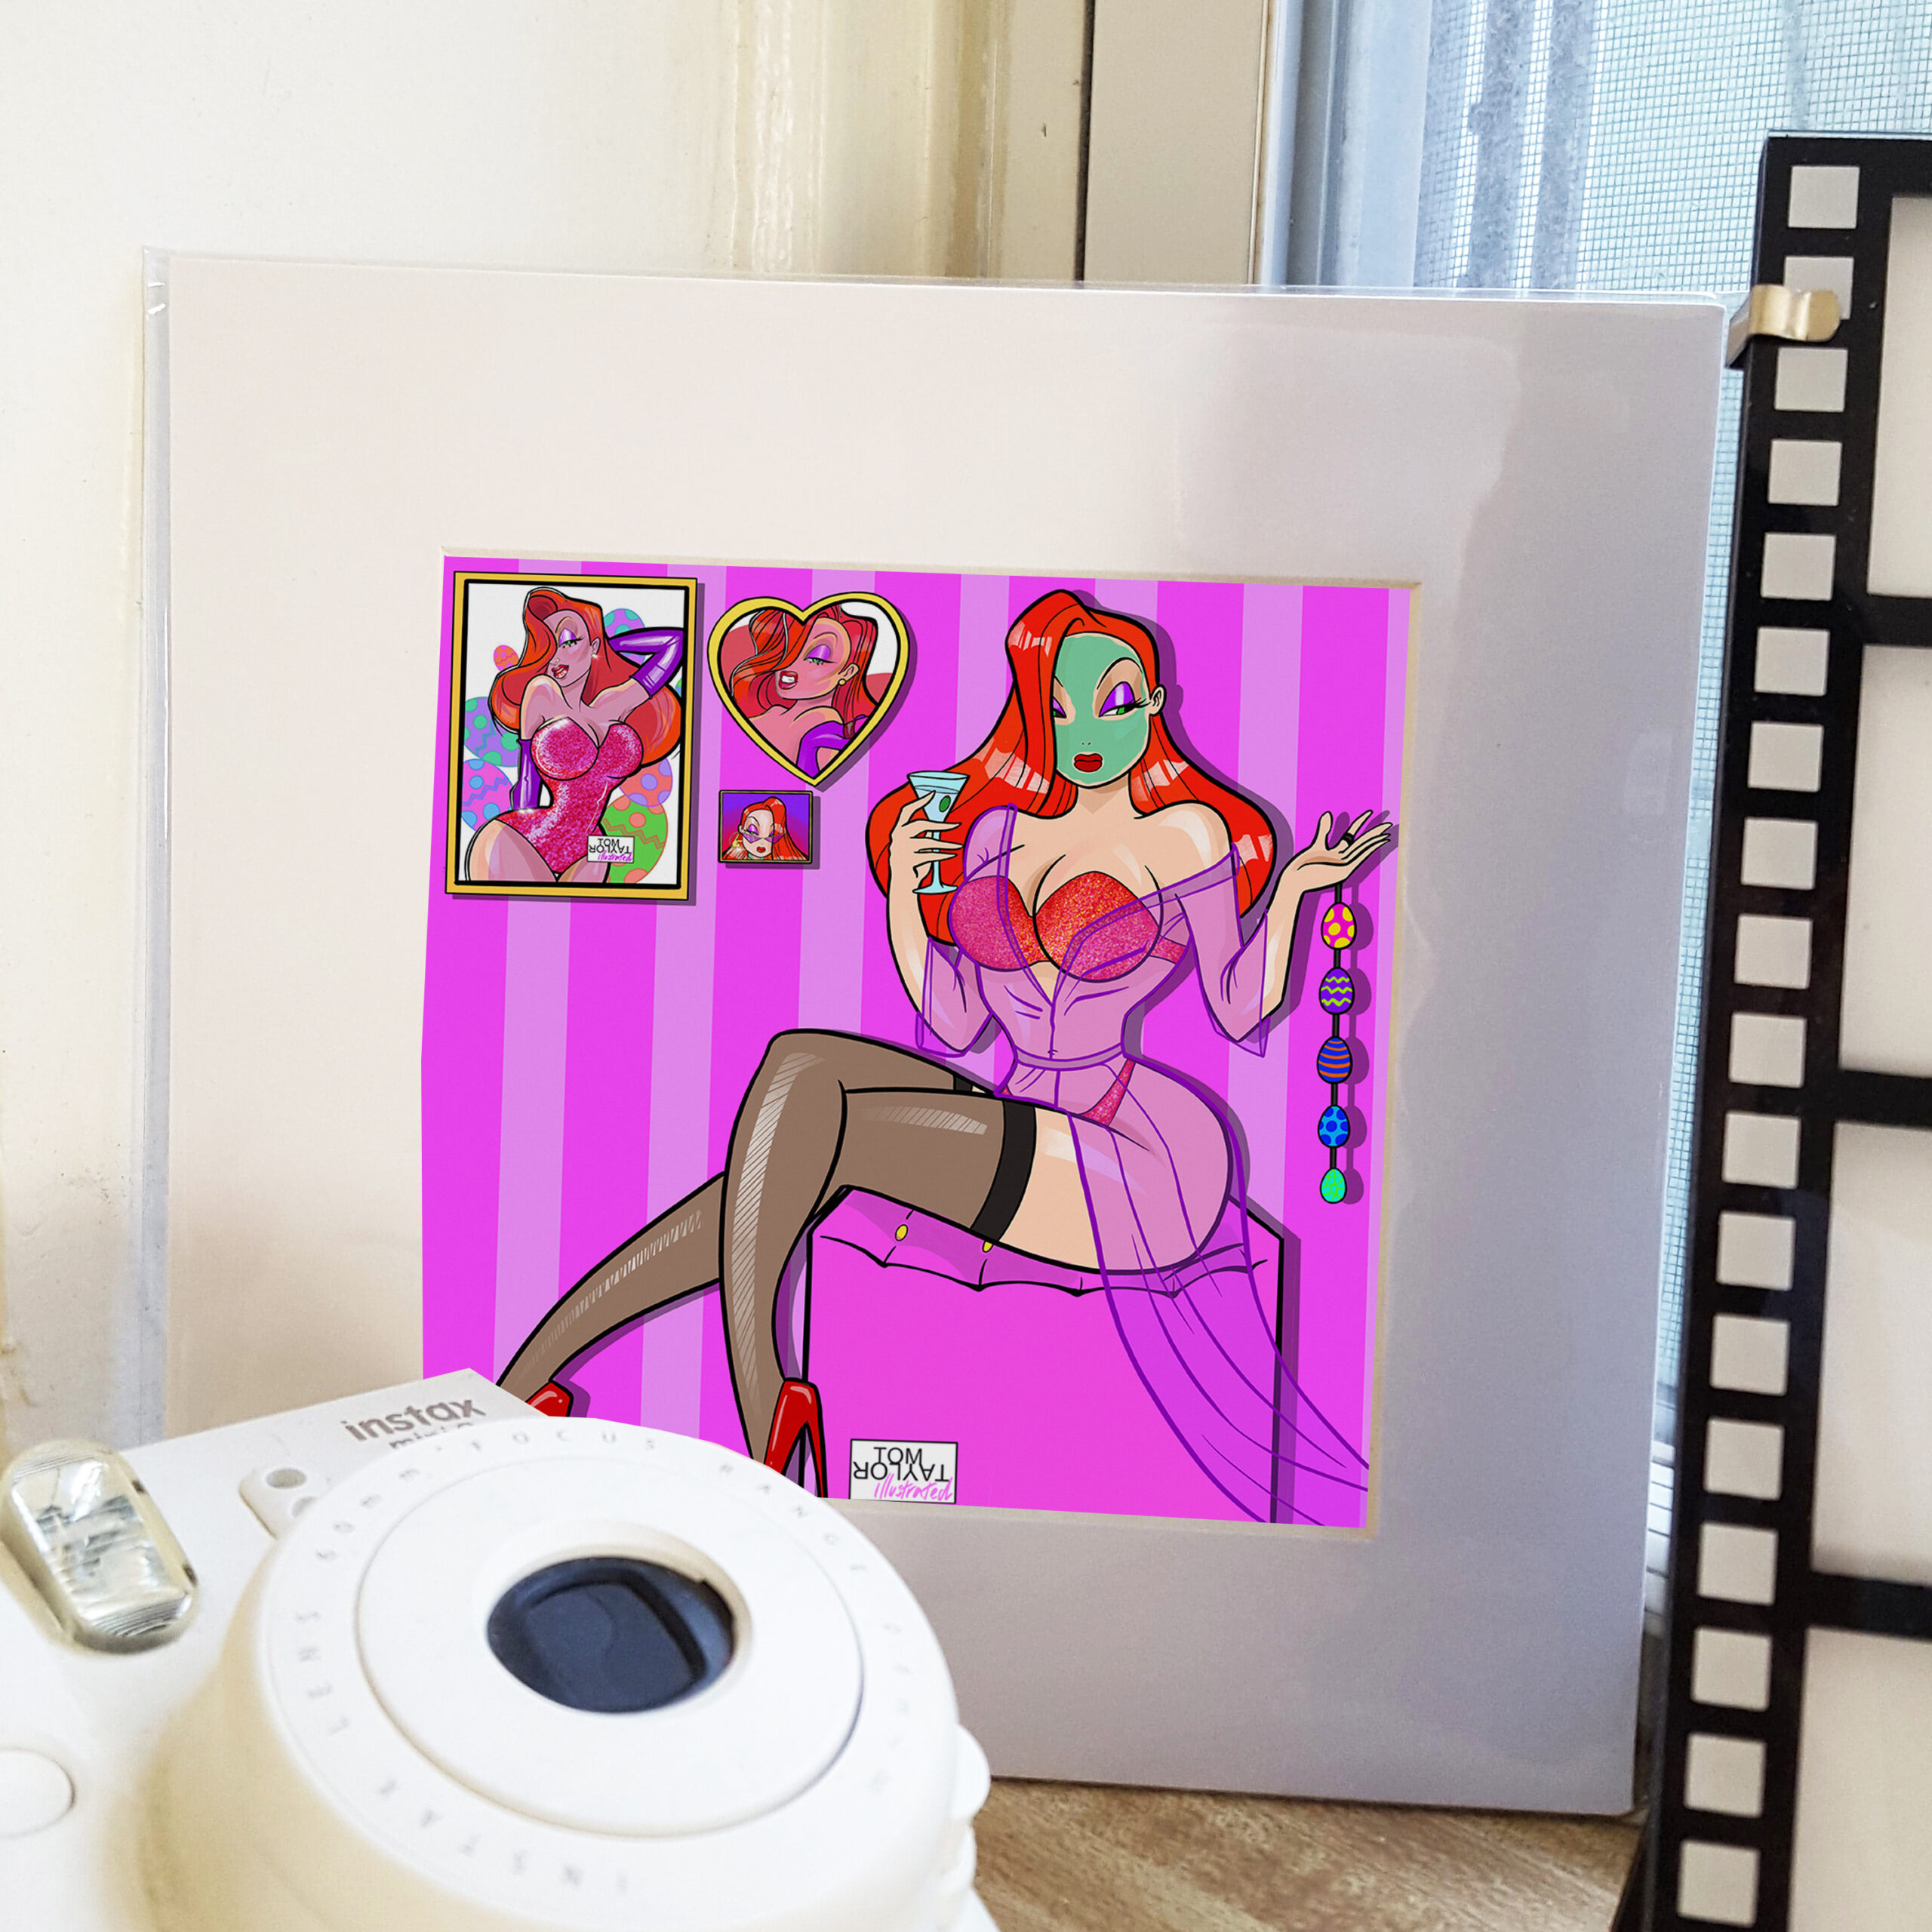 Special Edition Jessica Rabbit 1 scaled